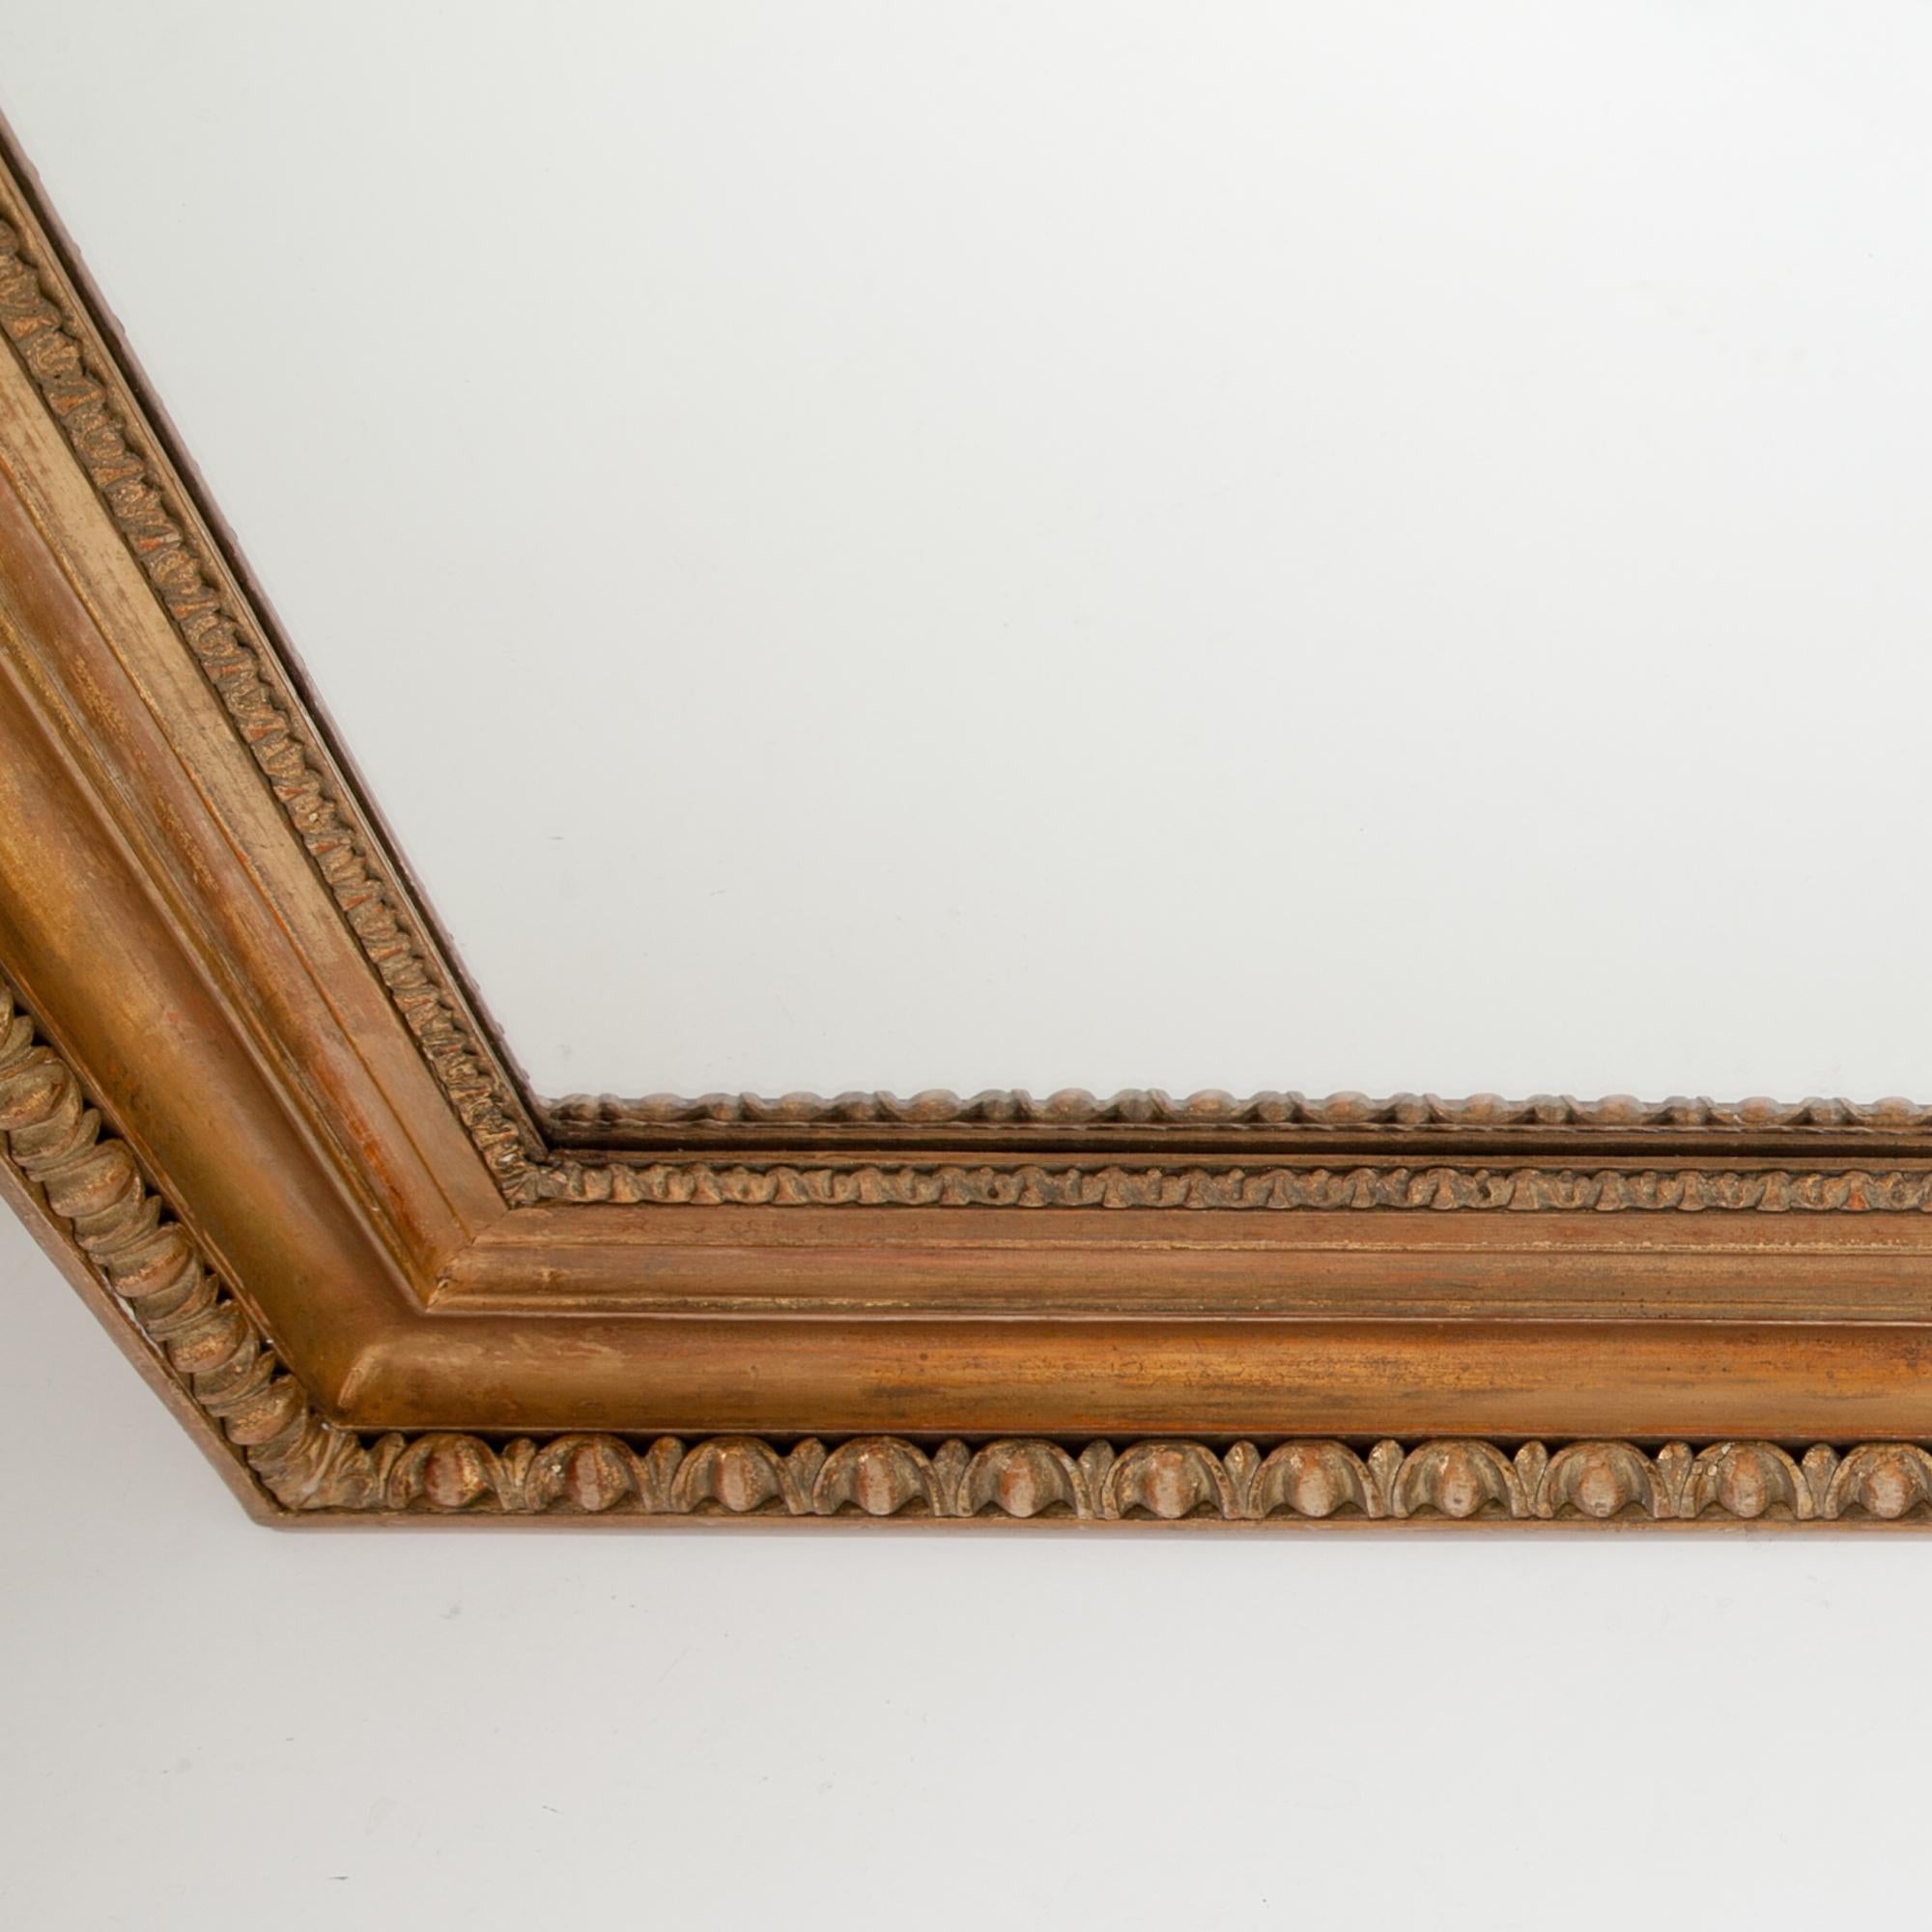 Neoclassical Giltwood Wall Mirror, 19th Century